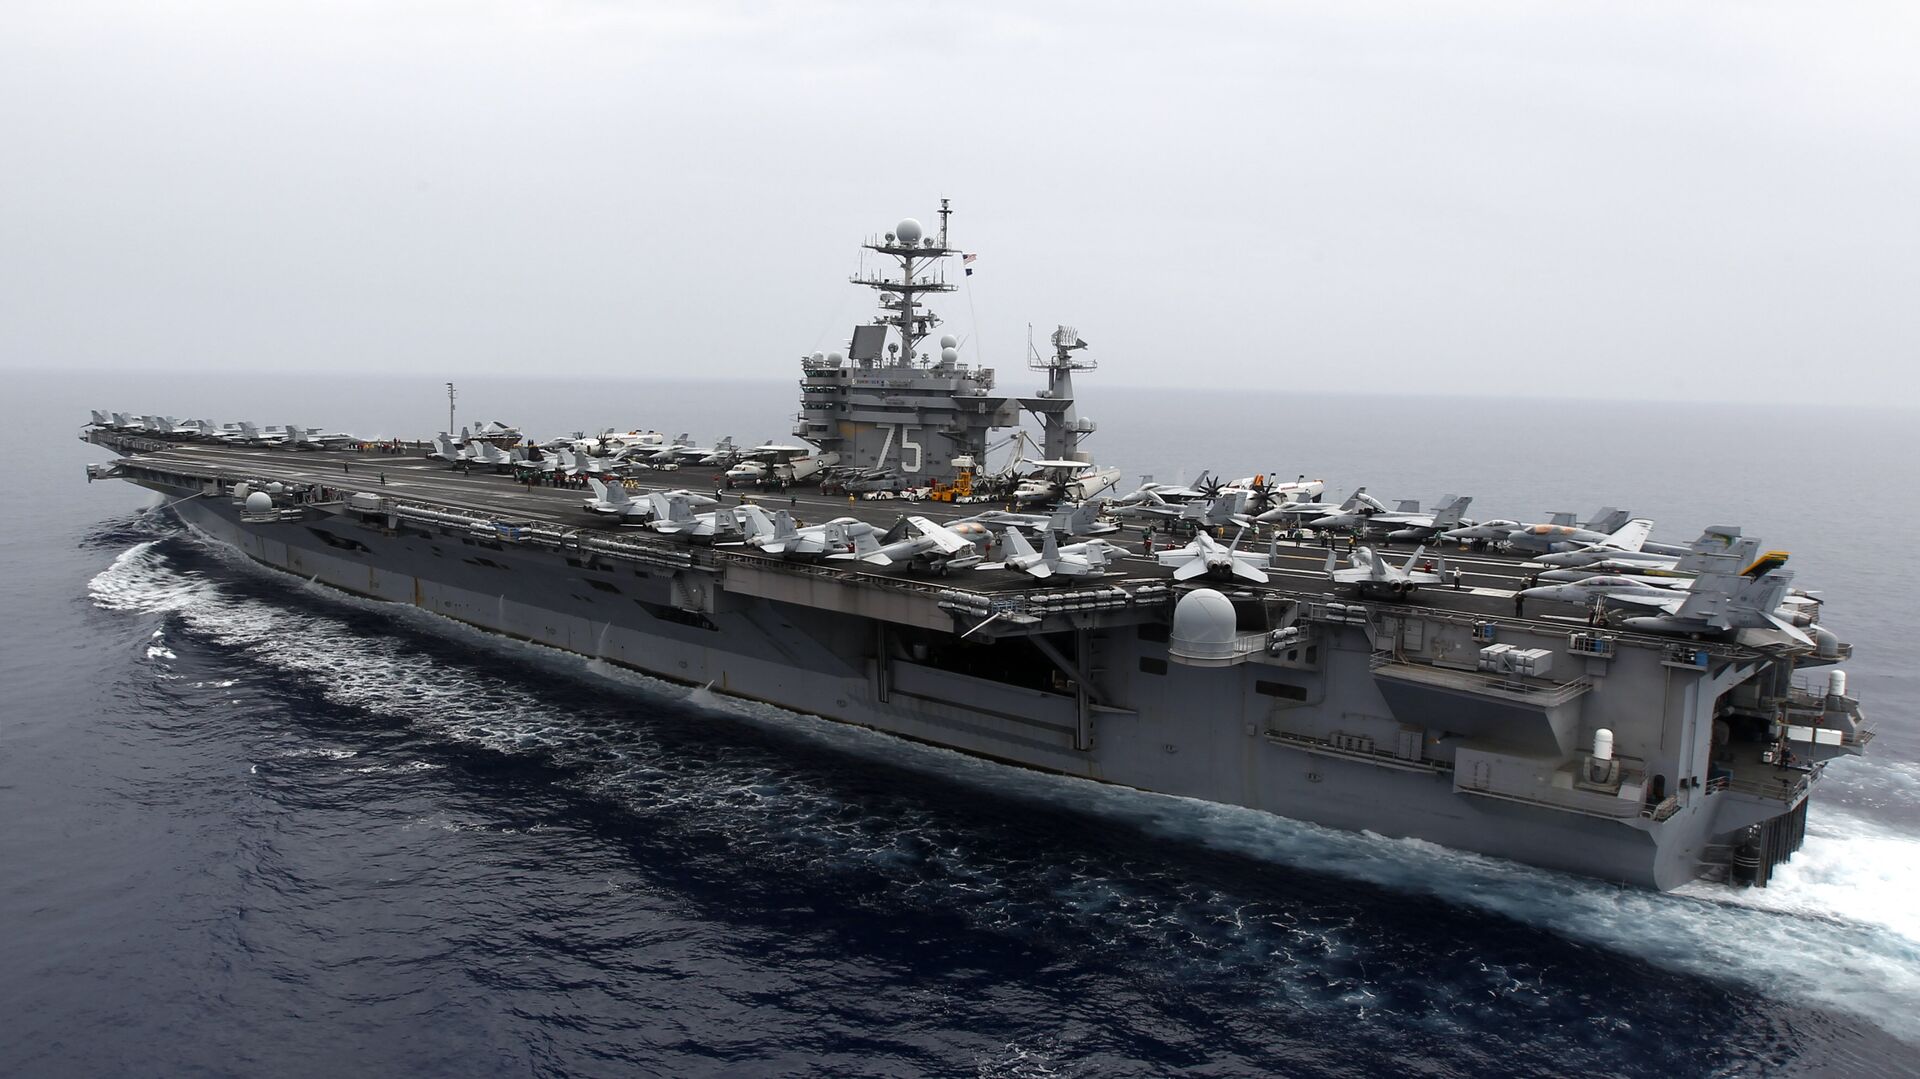 A general view shows the nuclear-powered aircraft carrier USS Harry S. Truman at an undisclosed position in the Mediterranean Sea, south of Sicily, Monday June 14, 2010 - Sputnik International, 1920, 28.12.2021